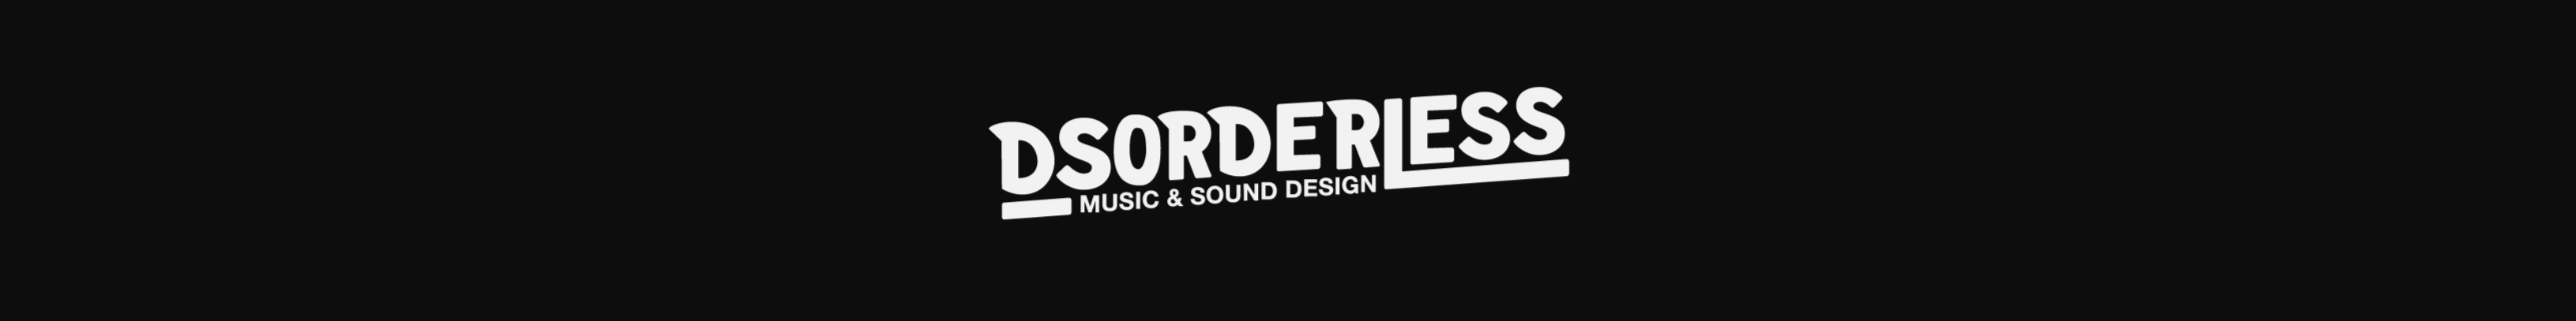 Dsorderless Music & Sound's profile banner